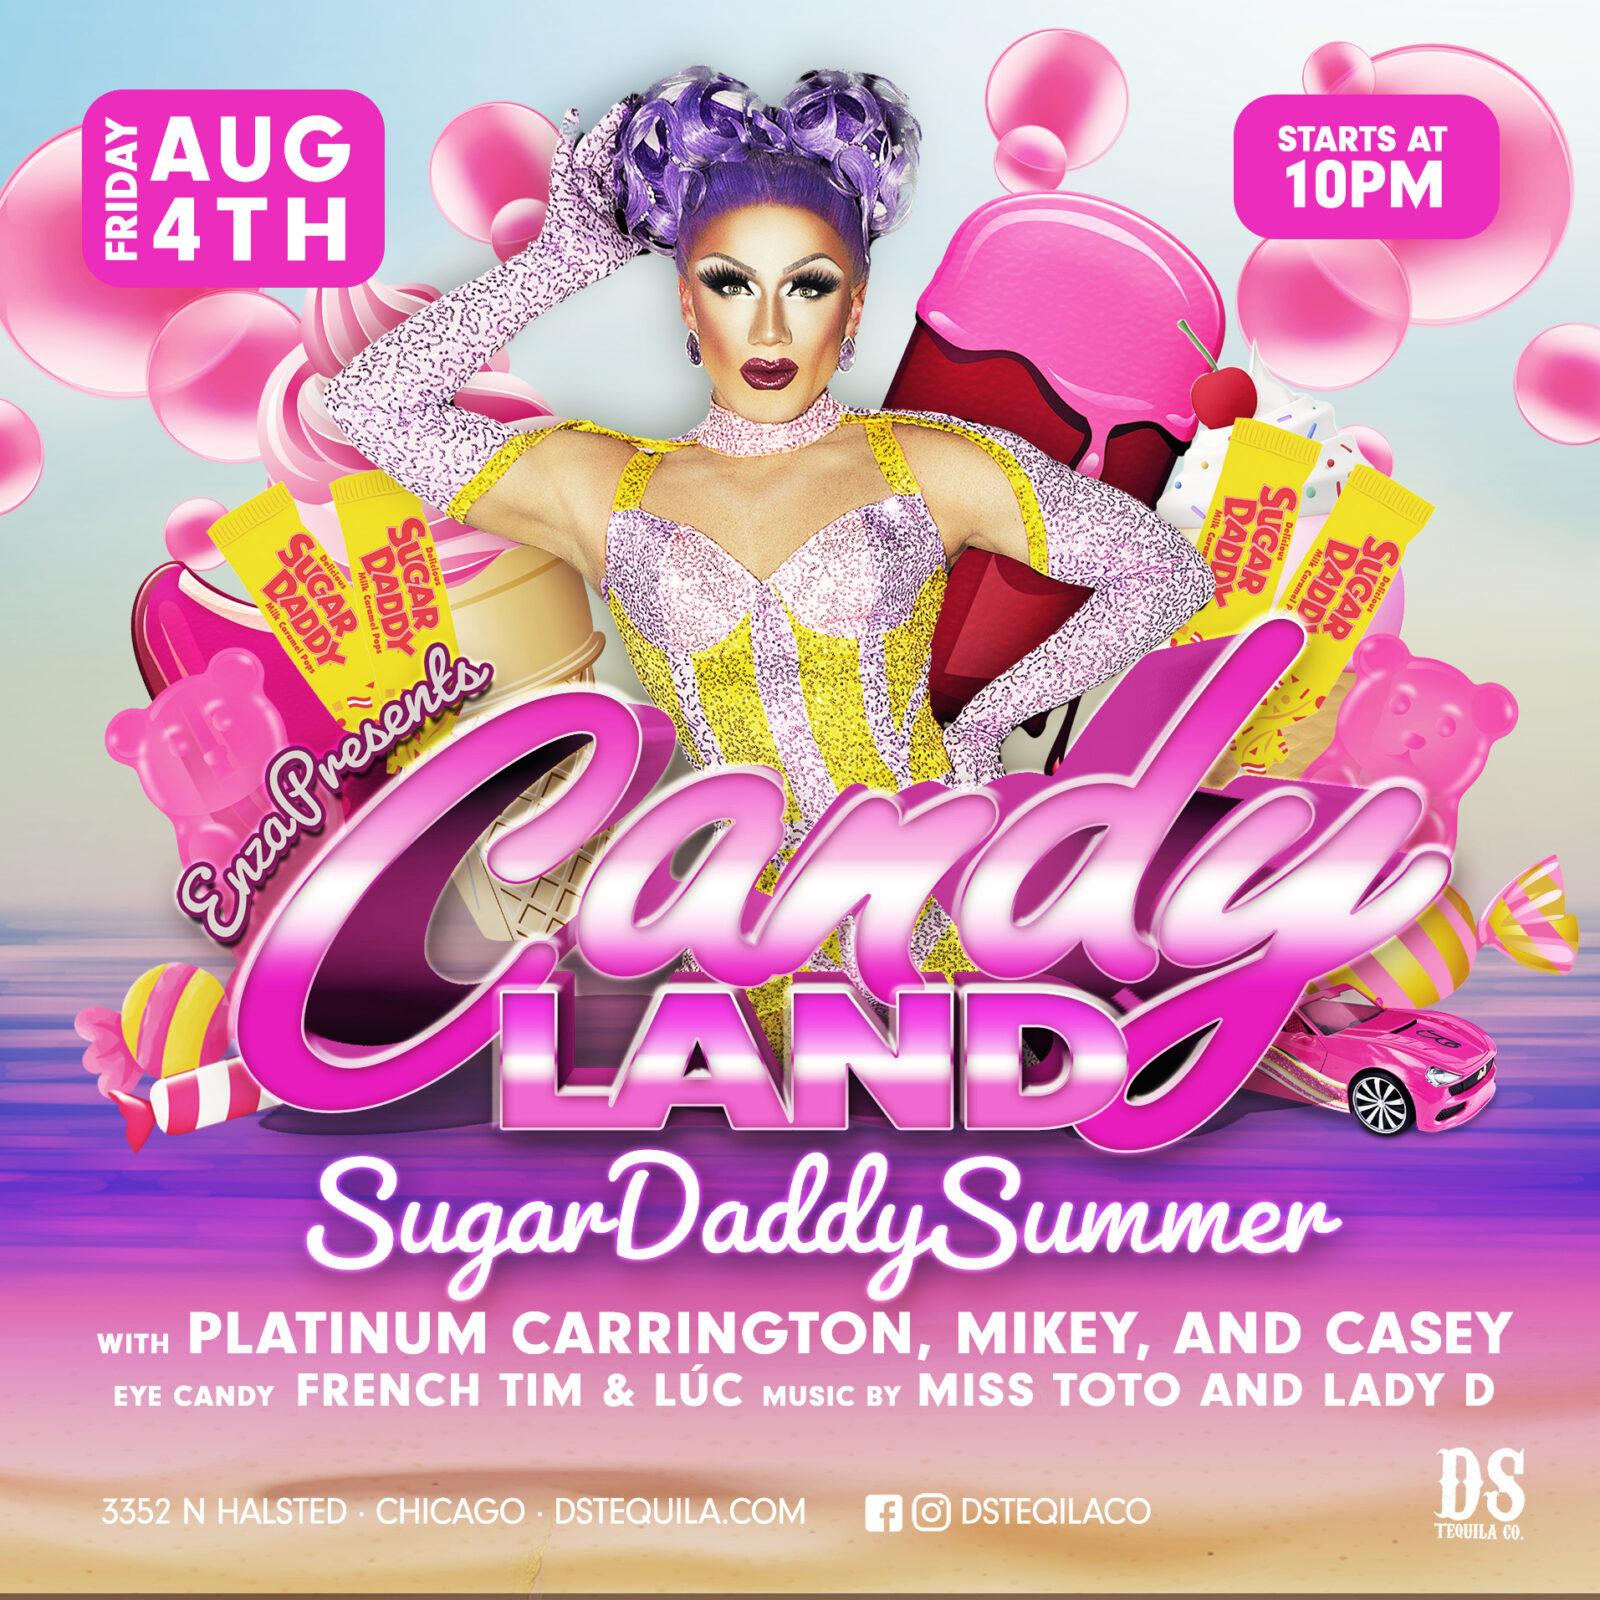 Candyland: Sugar Daddy Summer, Presented By Enza ⋆ D.S. Tequila Co.